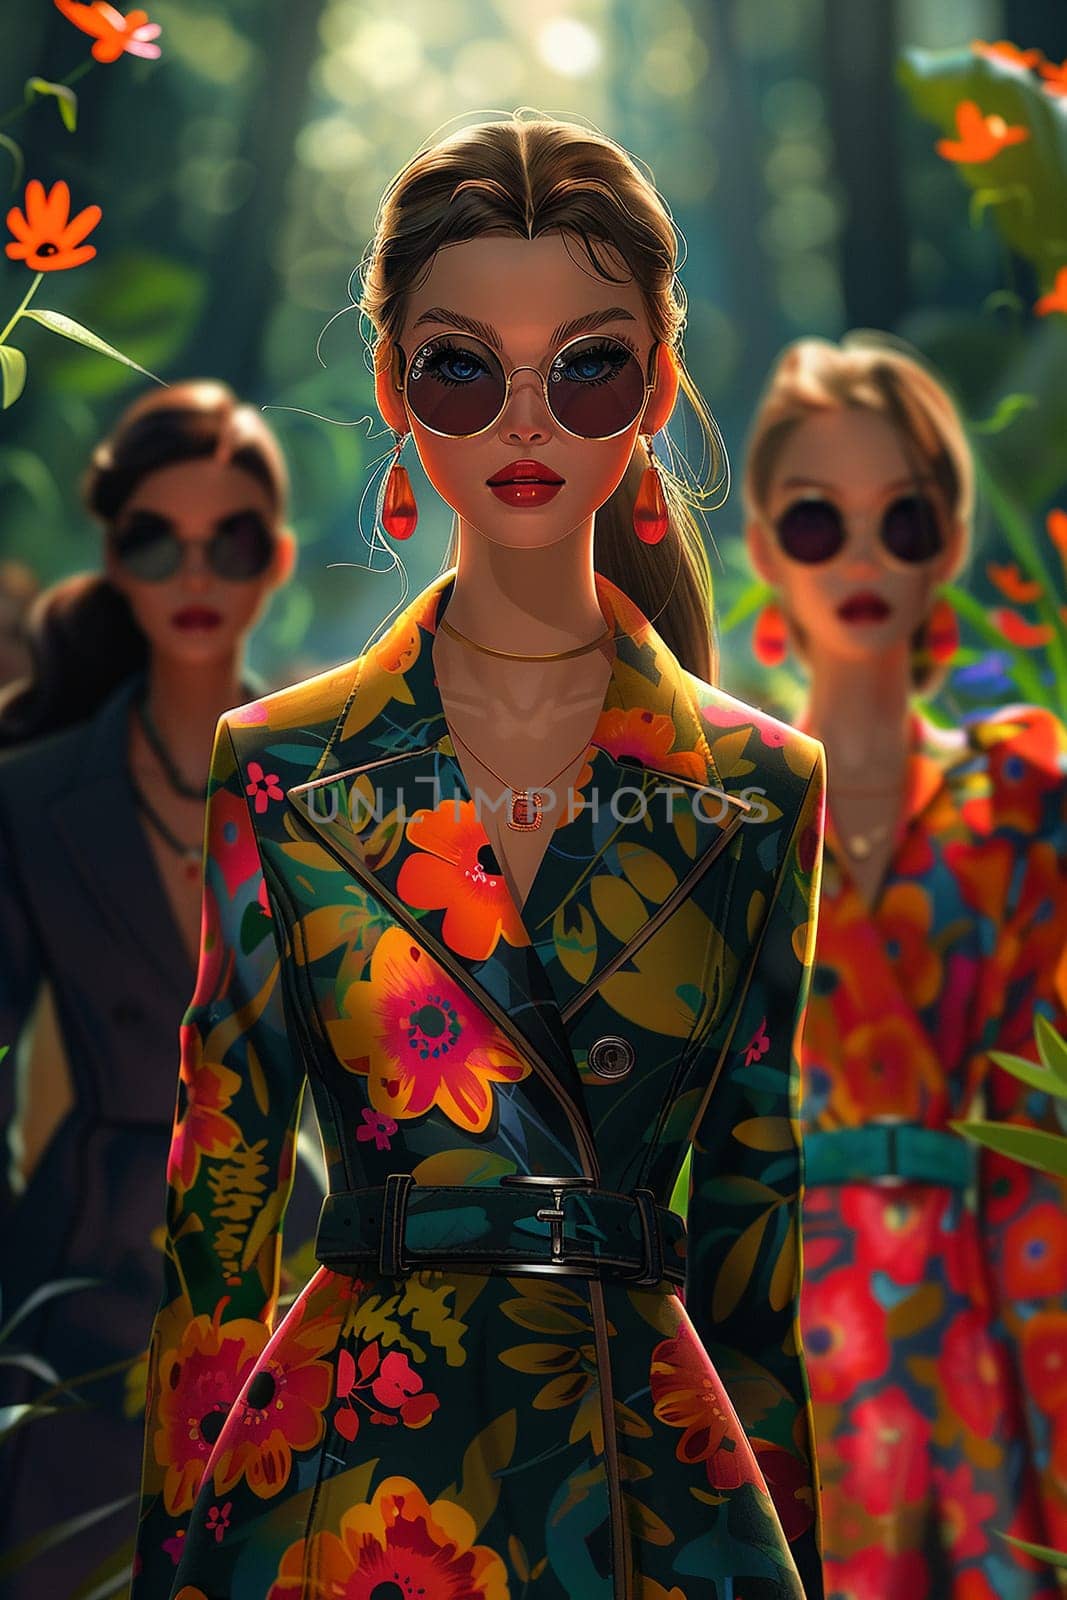 Fashion runway event cartoon, adding brightness with stylish characters and colorful designs.